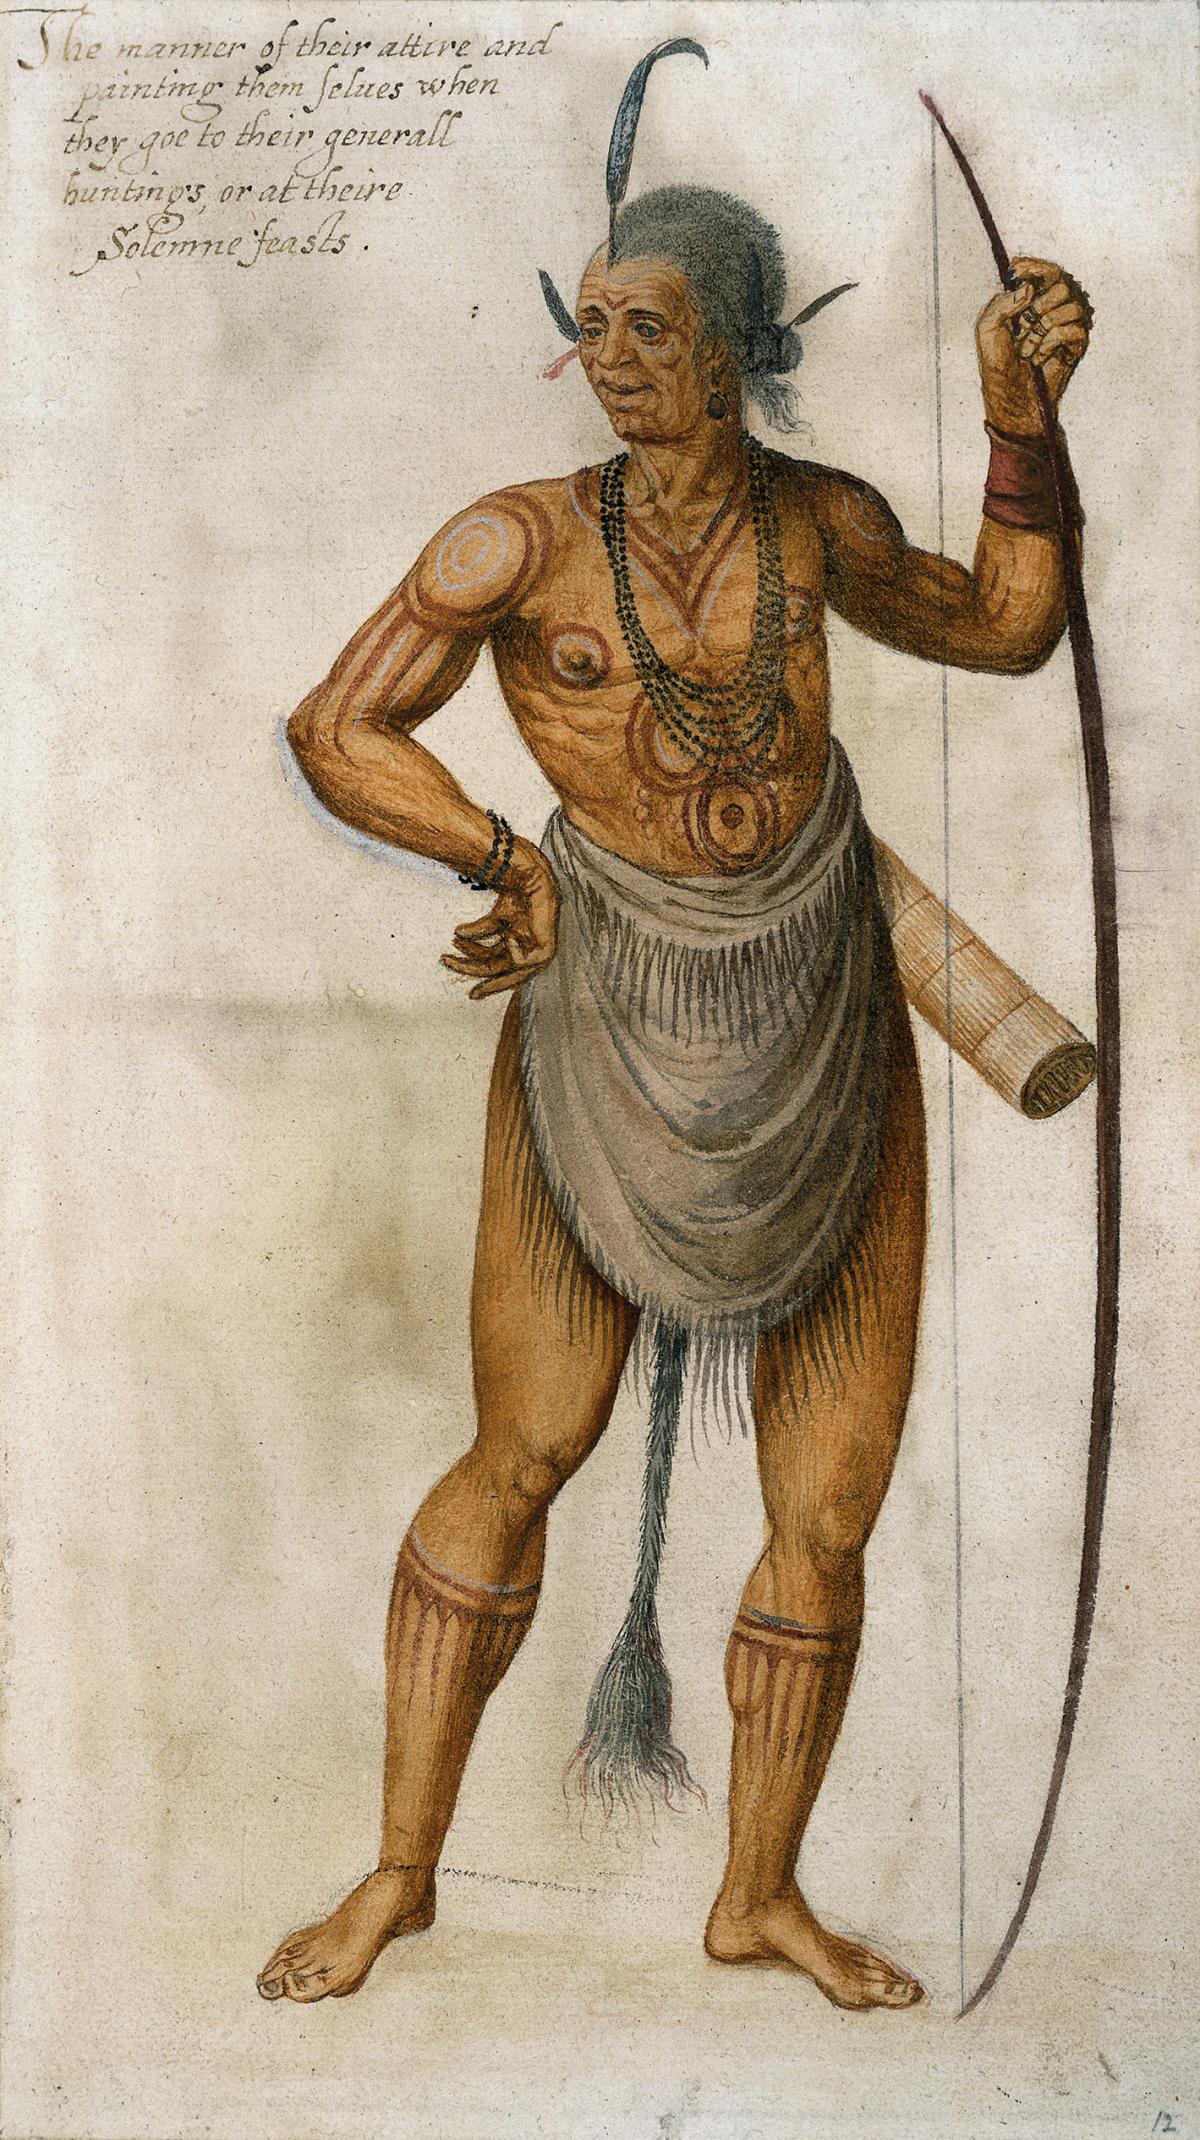 painting of a Native American hunter holding bow